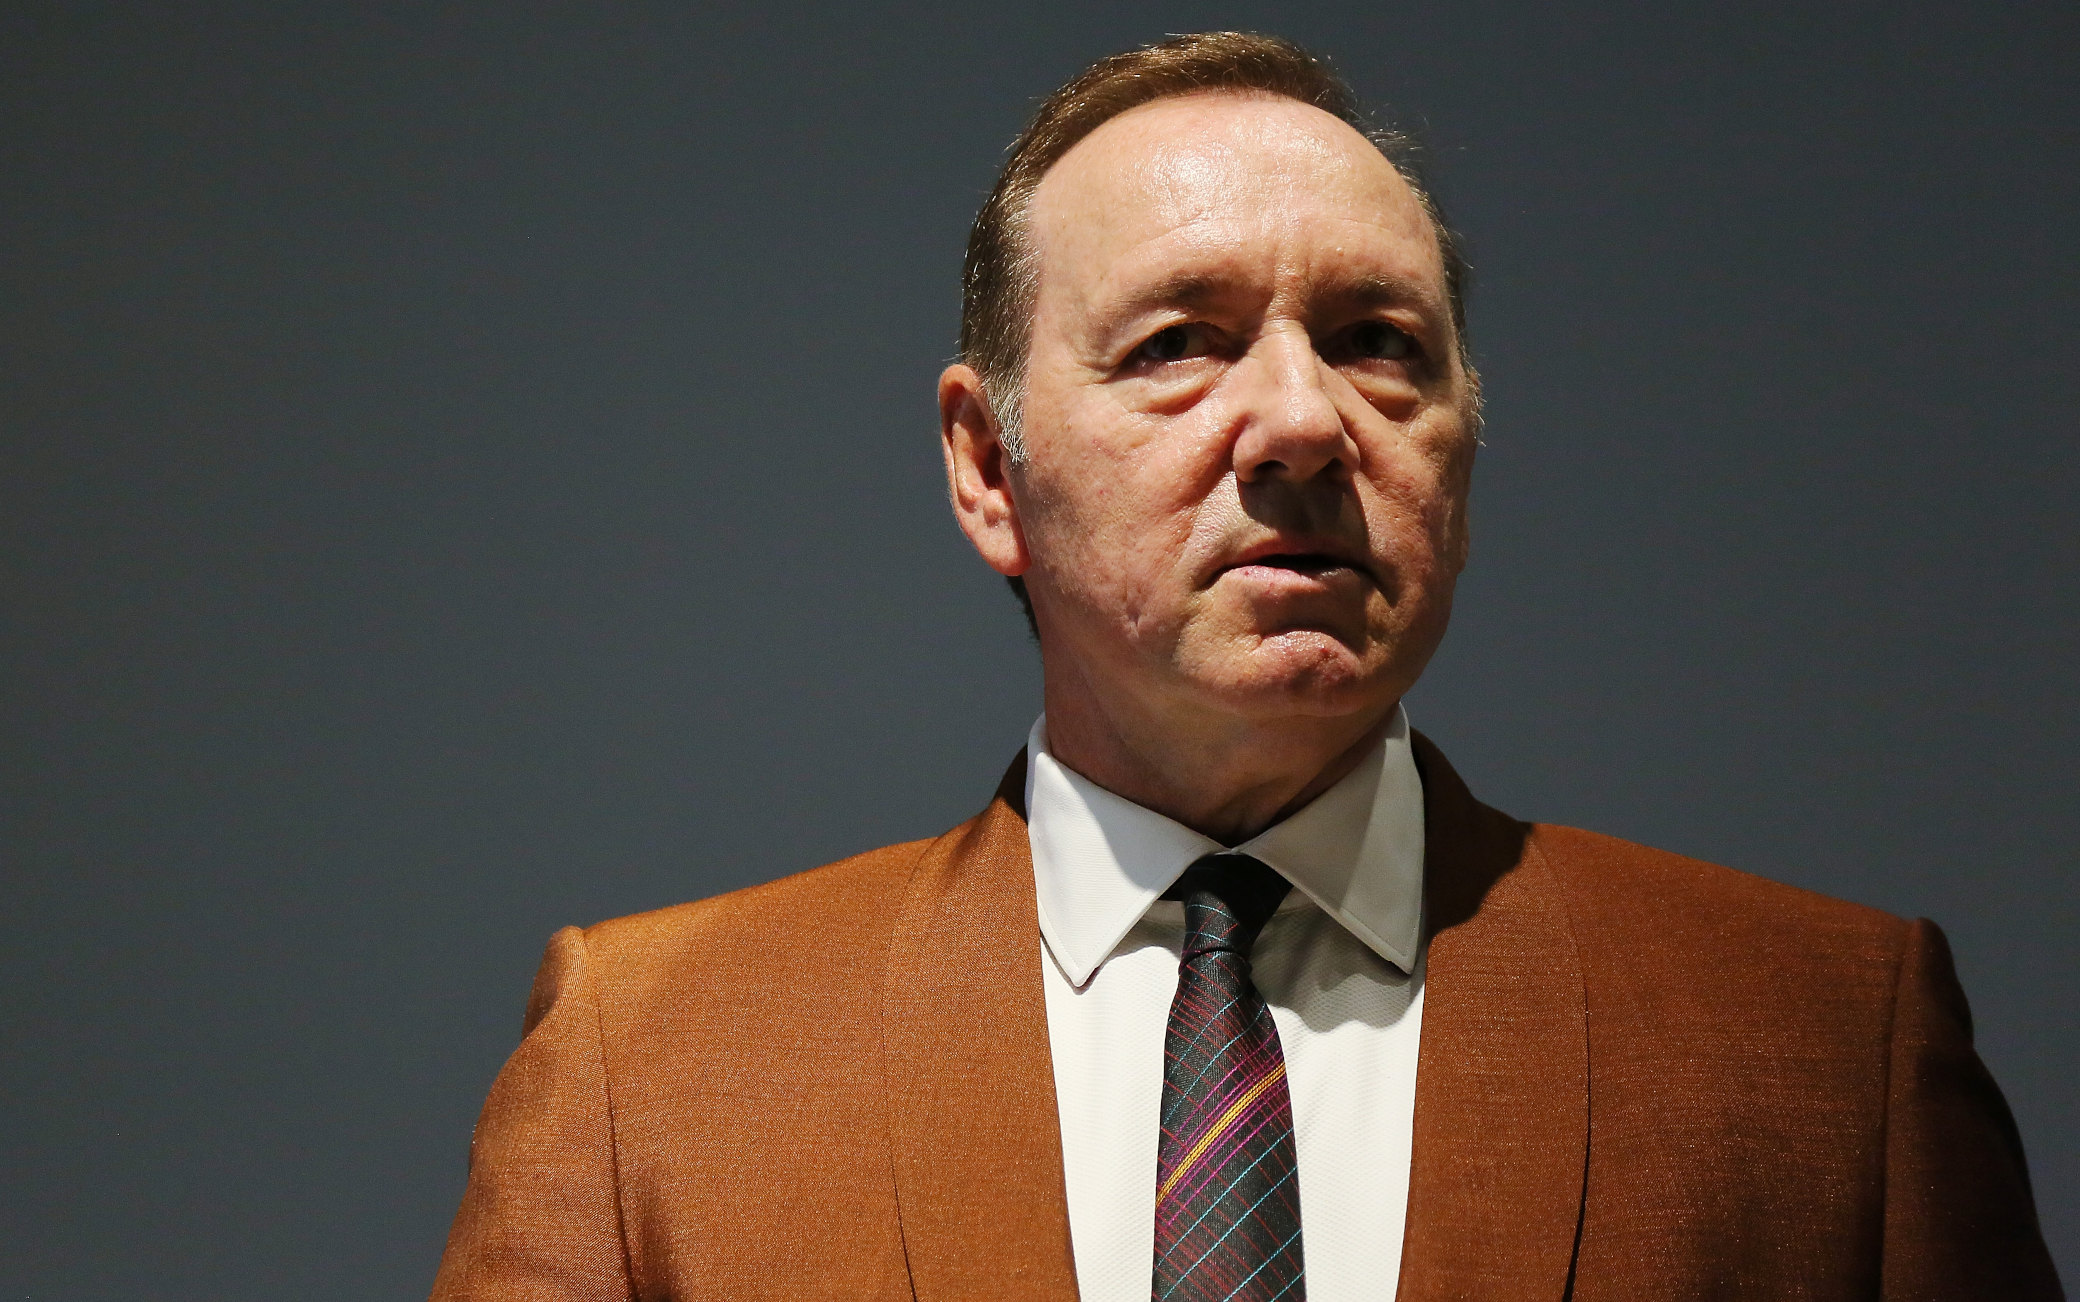 Kevin Spacey will have to pay House of Cards $ 31 million, that’s why